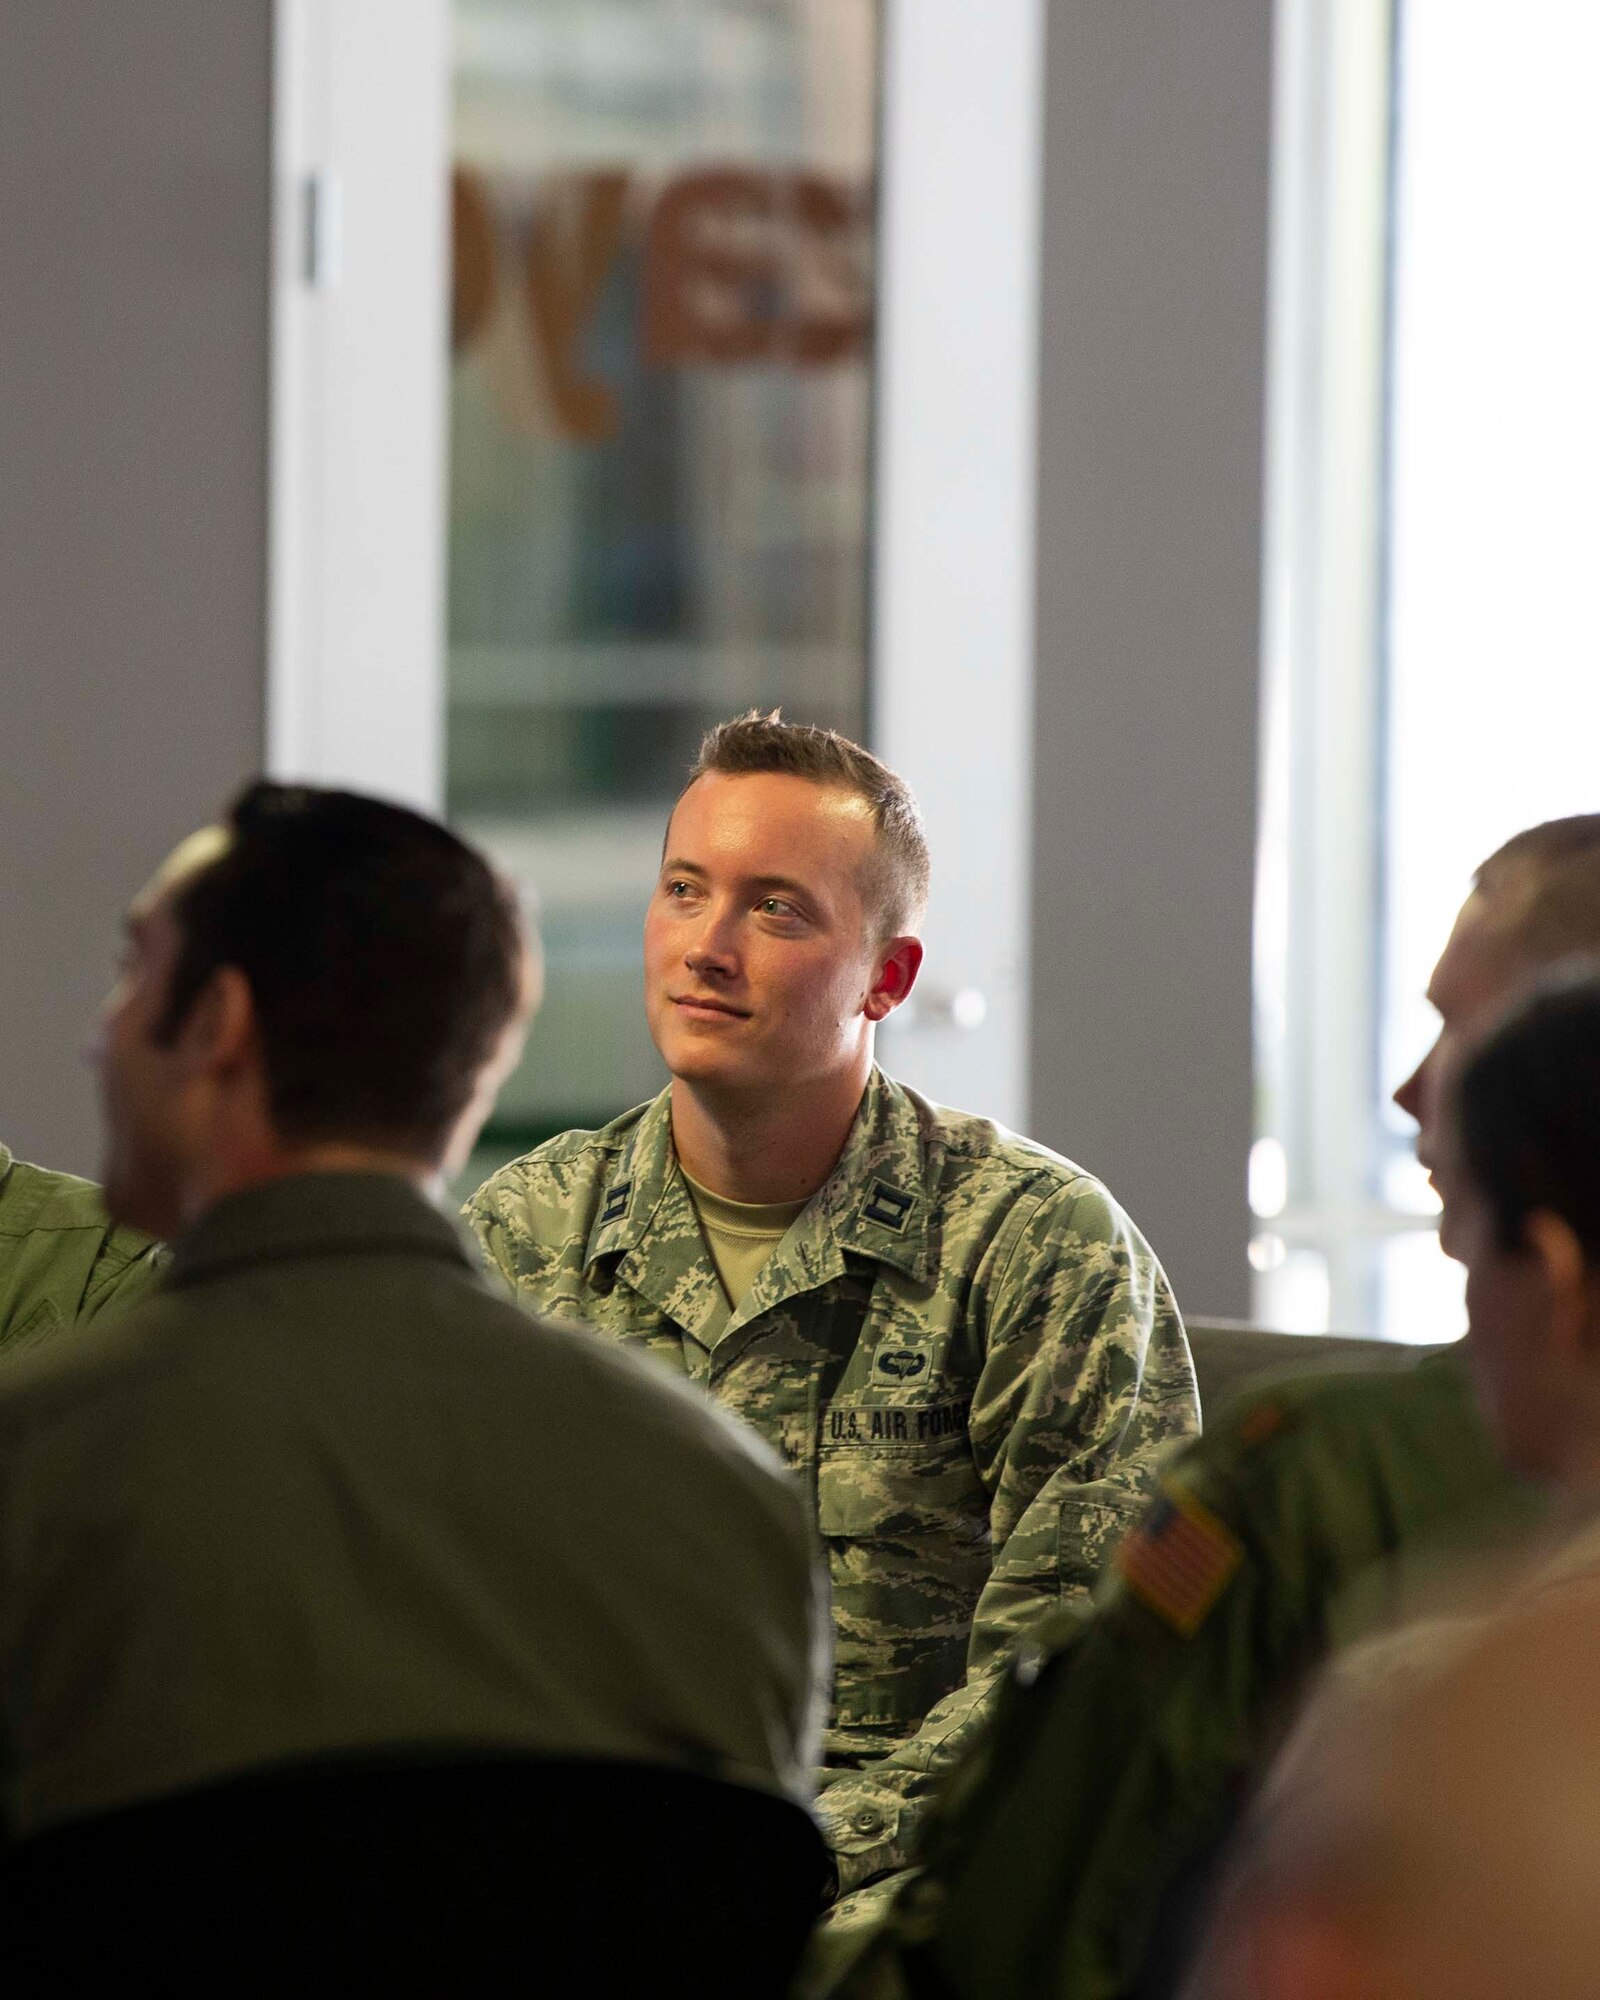 Capt. Kyle Palko, Project NEXUS lead, watches students present their capstone projects during the graduation at the AFWERX-Austin hub, Nov. 11, 2019. Designed by the Air Education and Training Command Technology Integration Detachment, the beta test program was designed to fuel organic technology problem solving efforts for Airmen in their day-to-day workplaces with skills like software development, data science, and user interface/user experience design. (Air National Guard Photo by Staff Sgt. Jordyn Fetter)